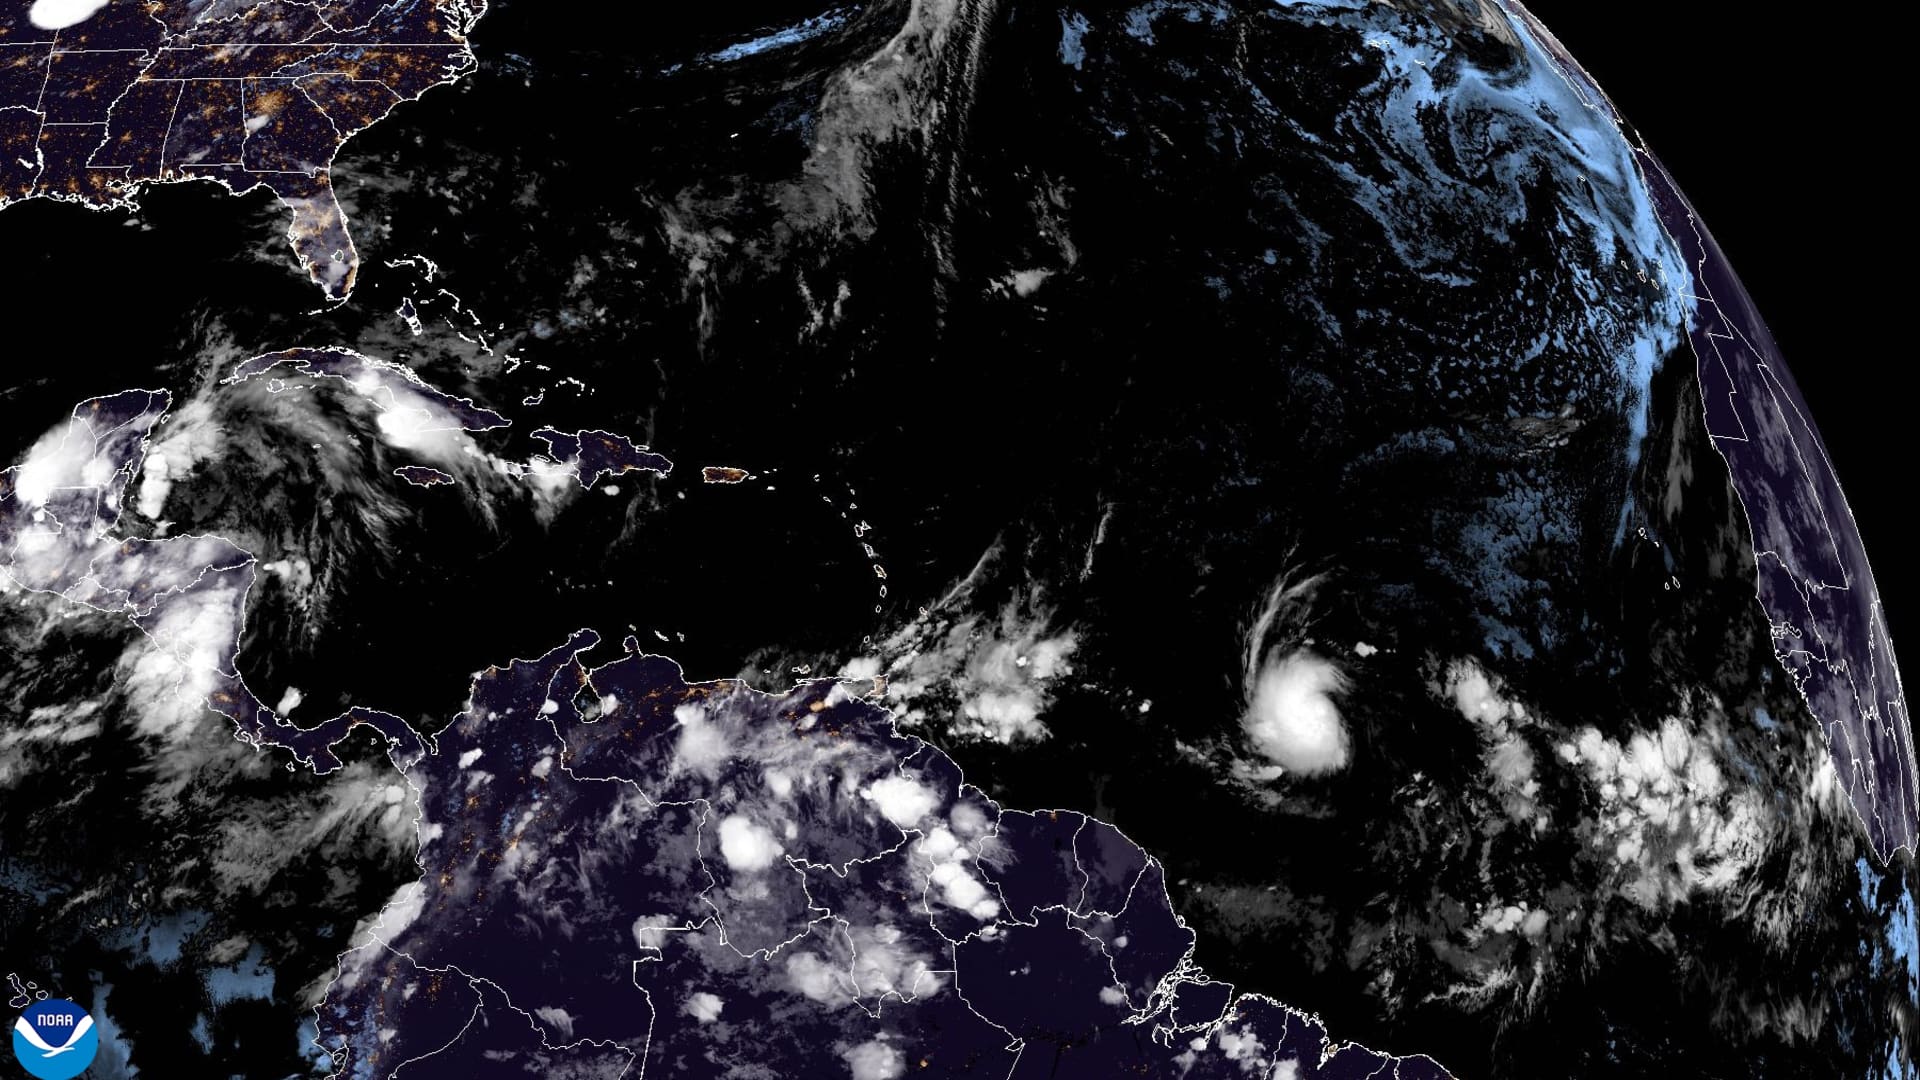 Beryl is strengthening as a hurricane in the Atlantic Ocean and is expected to become a major storm